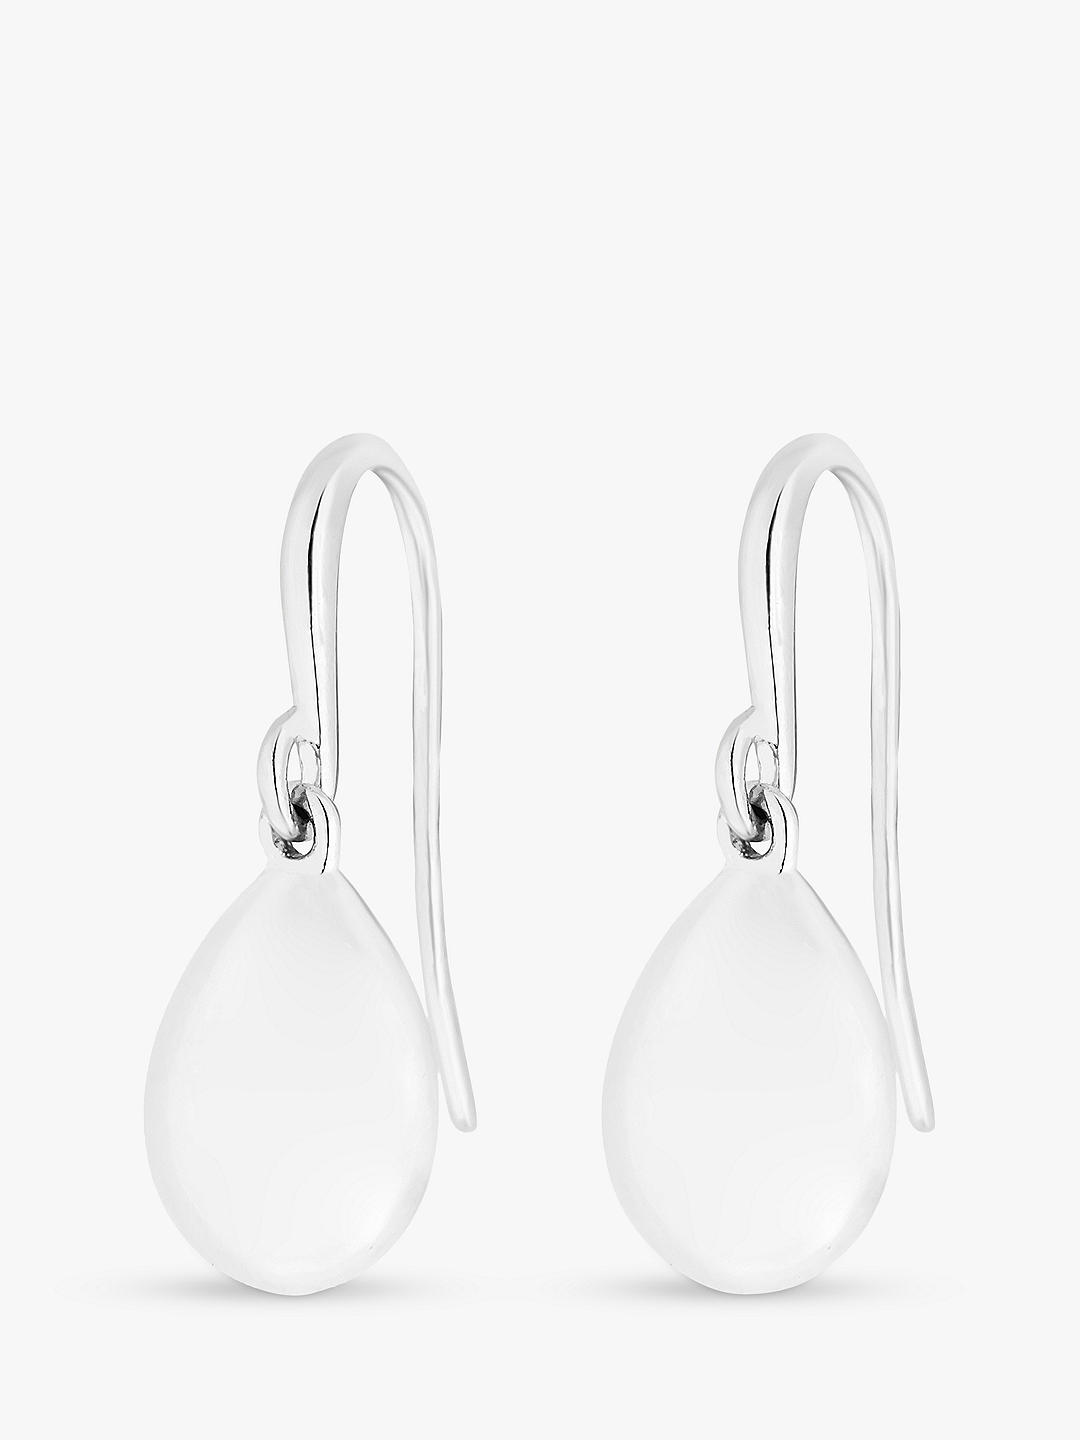 Simply Silver Sterling Silver 925 Polished Pear Bead Drop Earrings, Silver